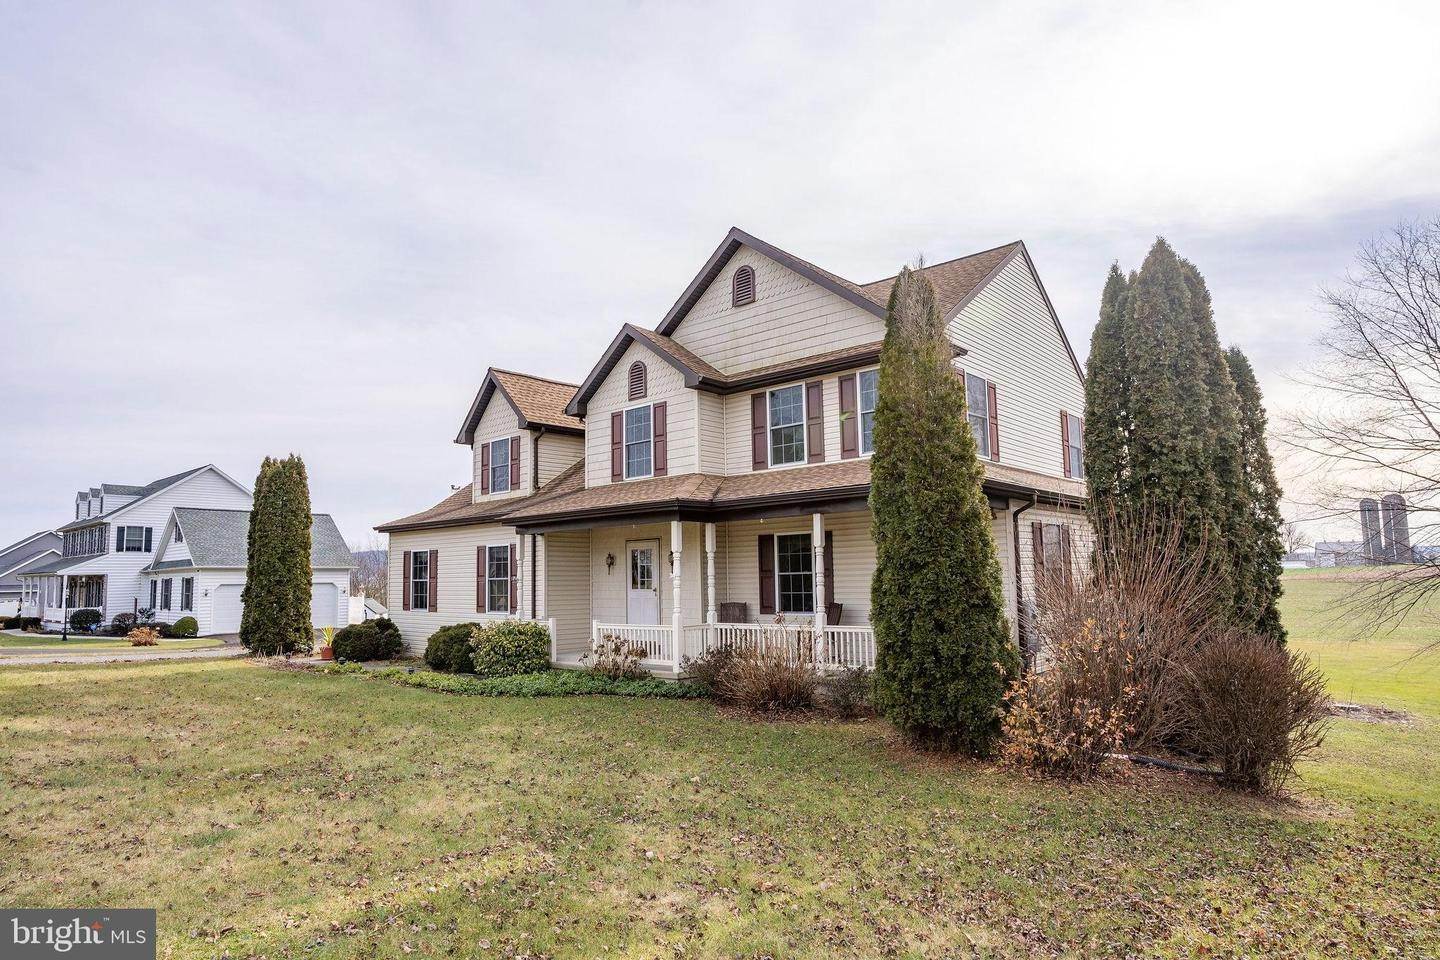 2. Residential for Sale at 108 COUNTRY Lane Richland, Pennsylvania 17087 United States